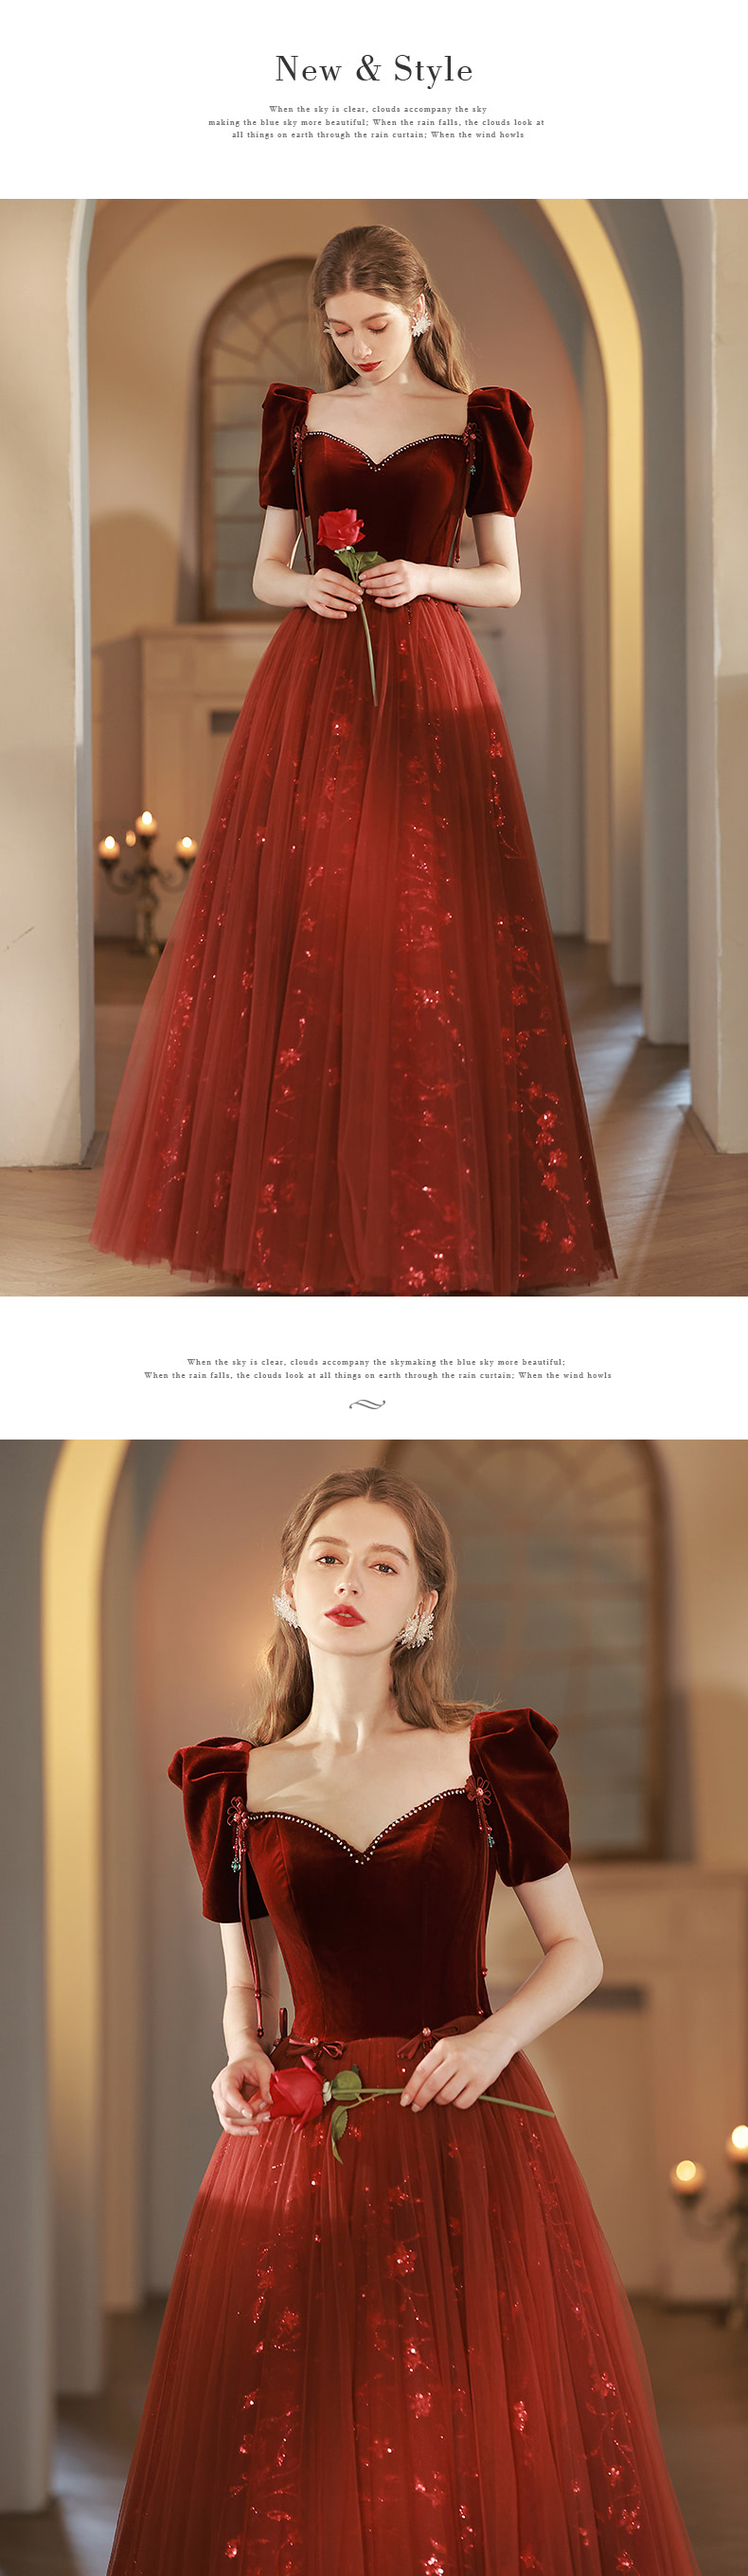 Vintage-Velvet-Embroidery-Evening-Party-Banquet-Long-Prom-Dress10.jpg